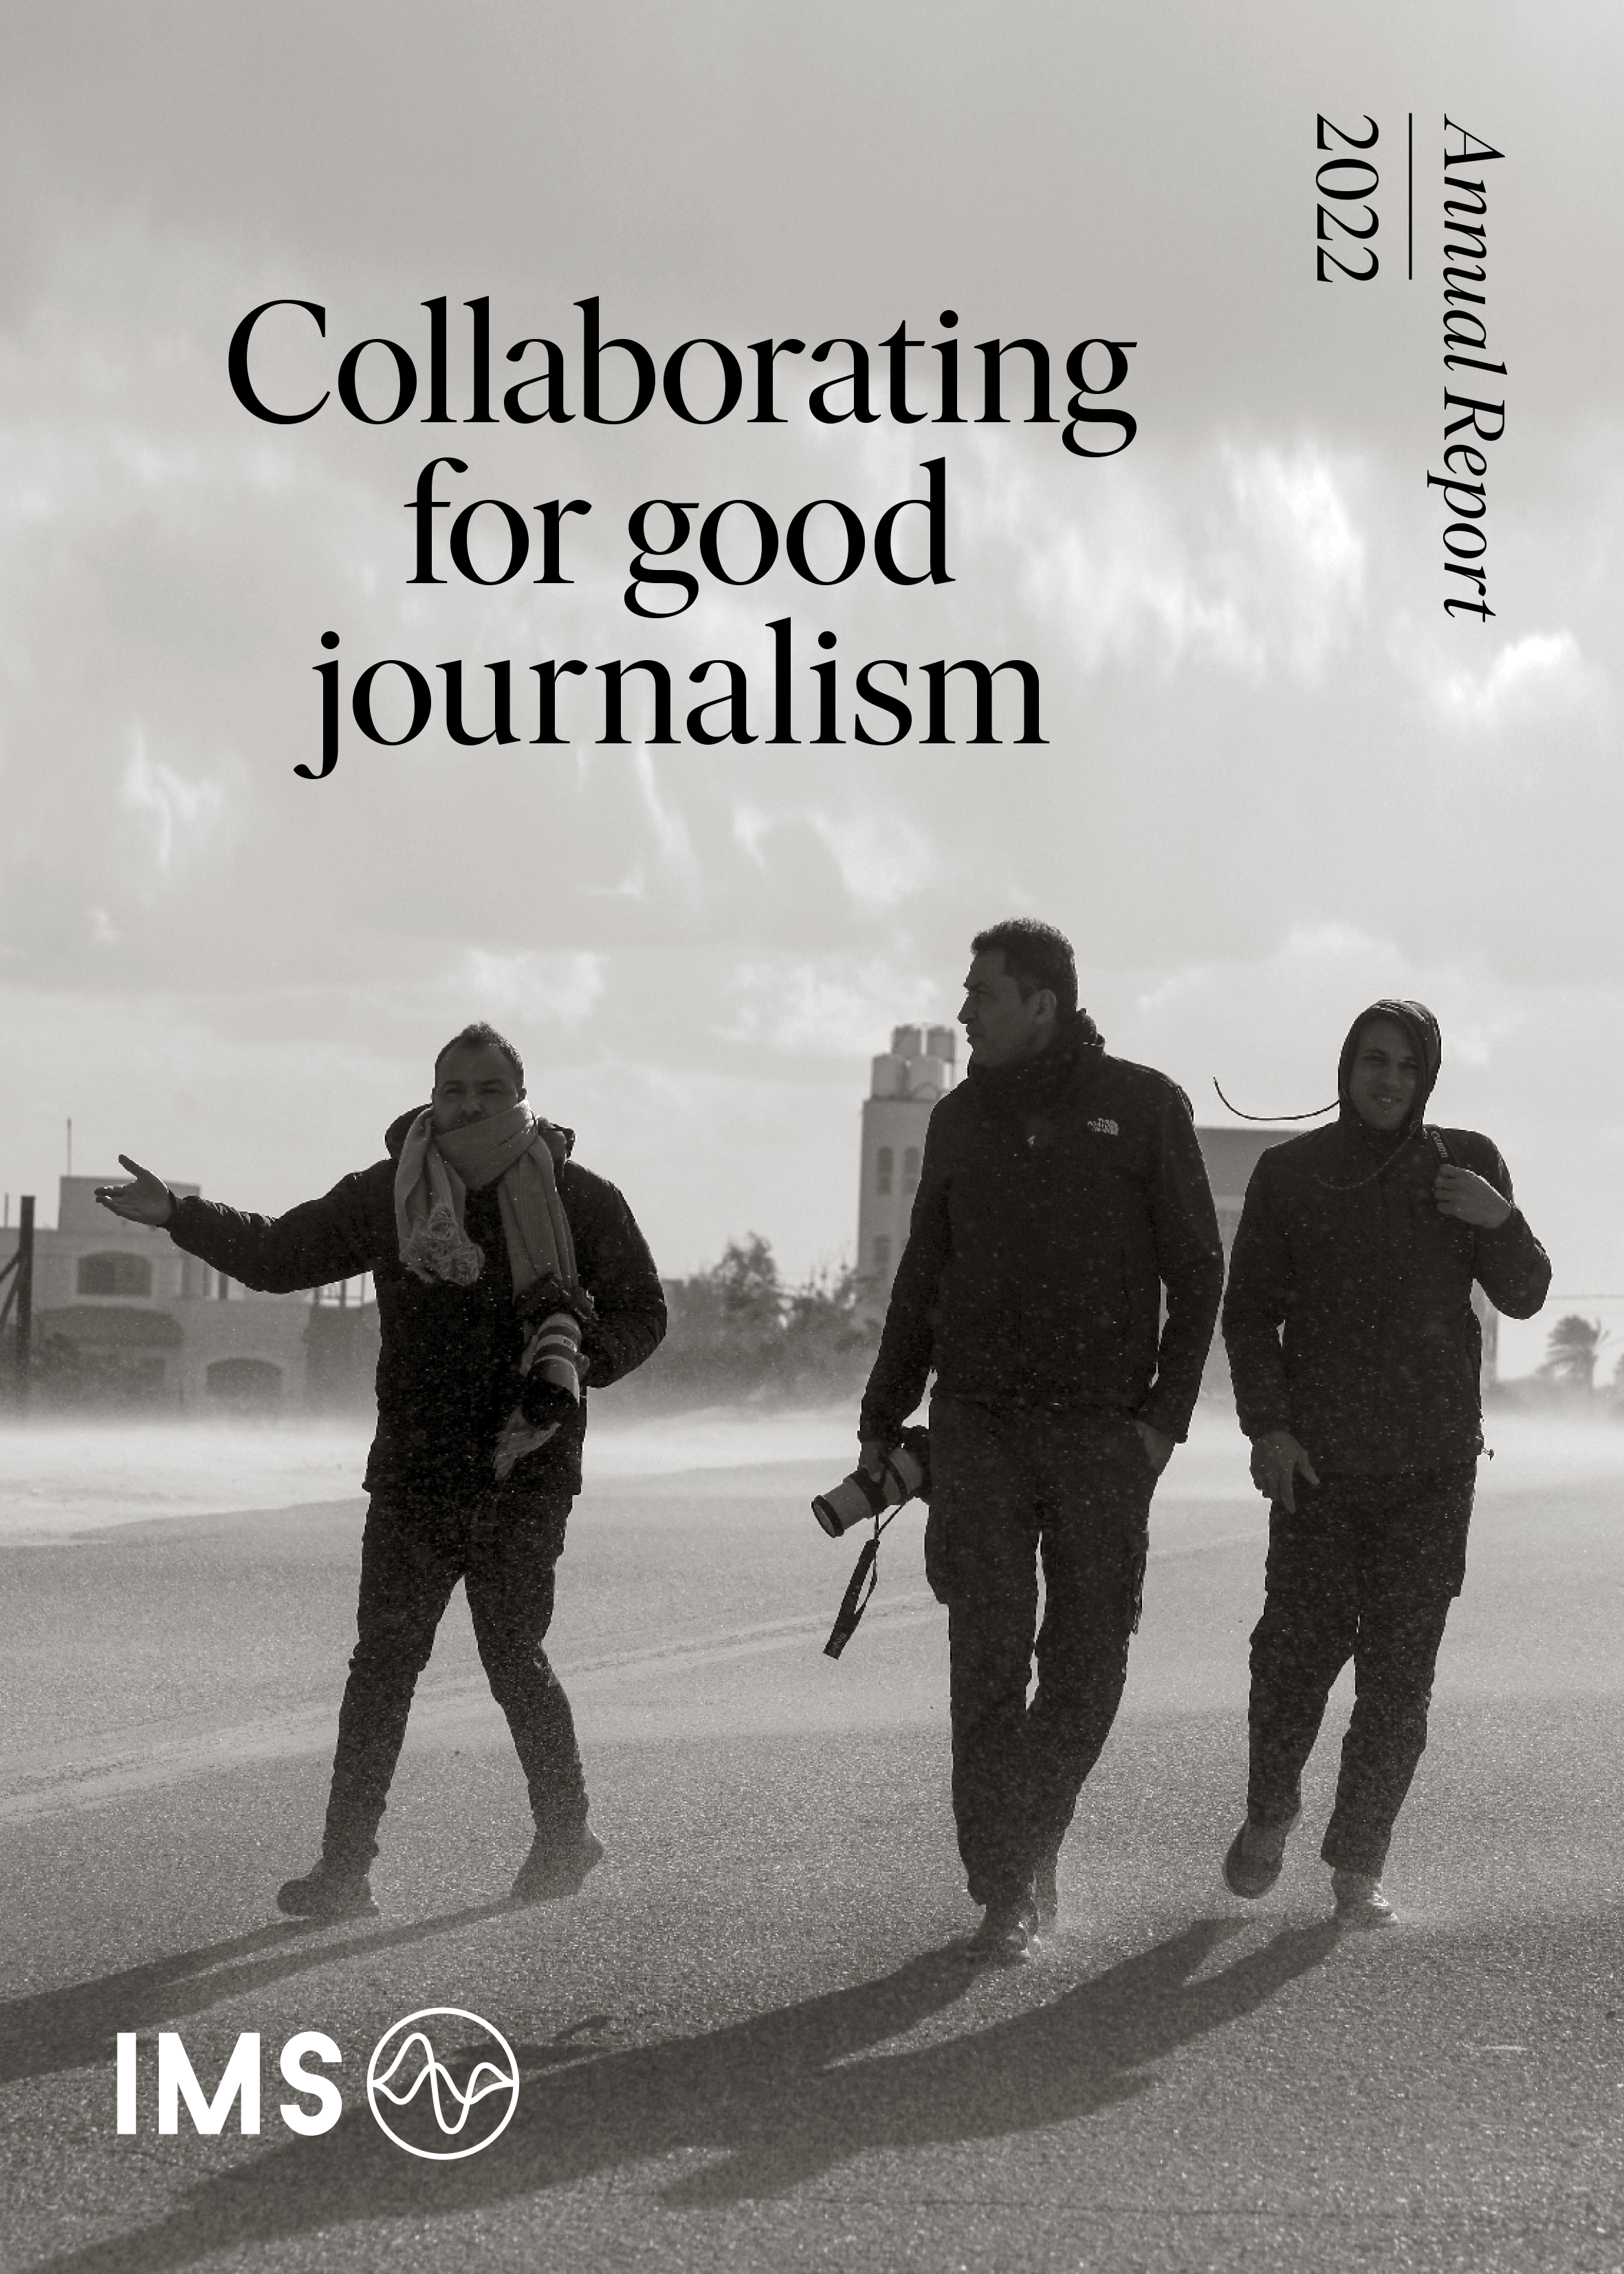 IMS annual report 2022: Collaborating for good journalism